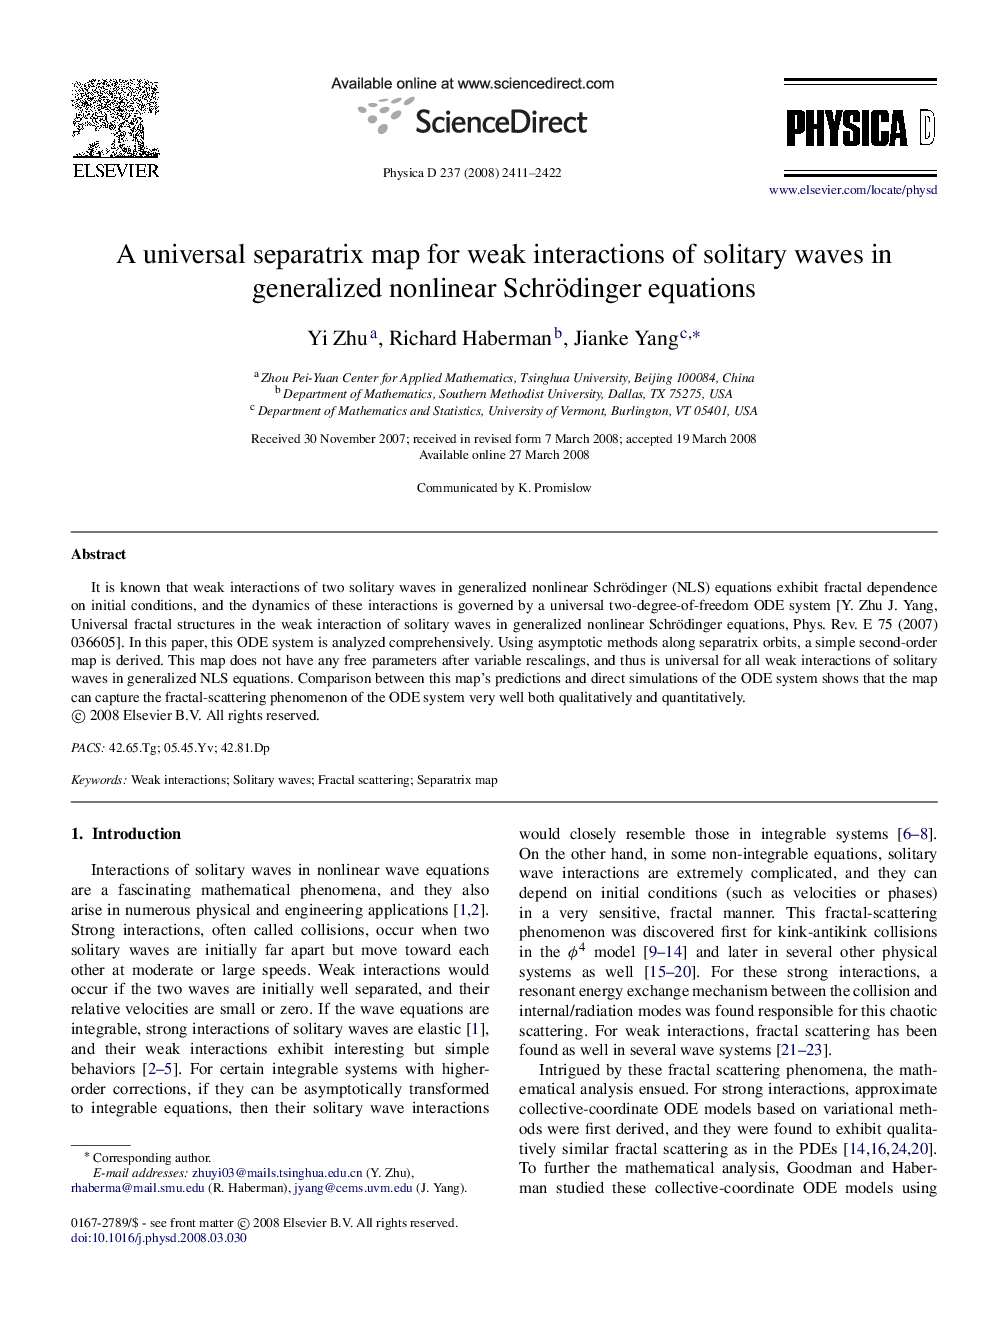 A universal separatrix map for weak interactions of solitary waves in generalized nonlinear Schrödinger equations